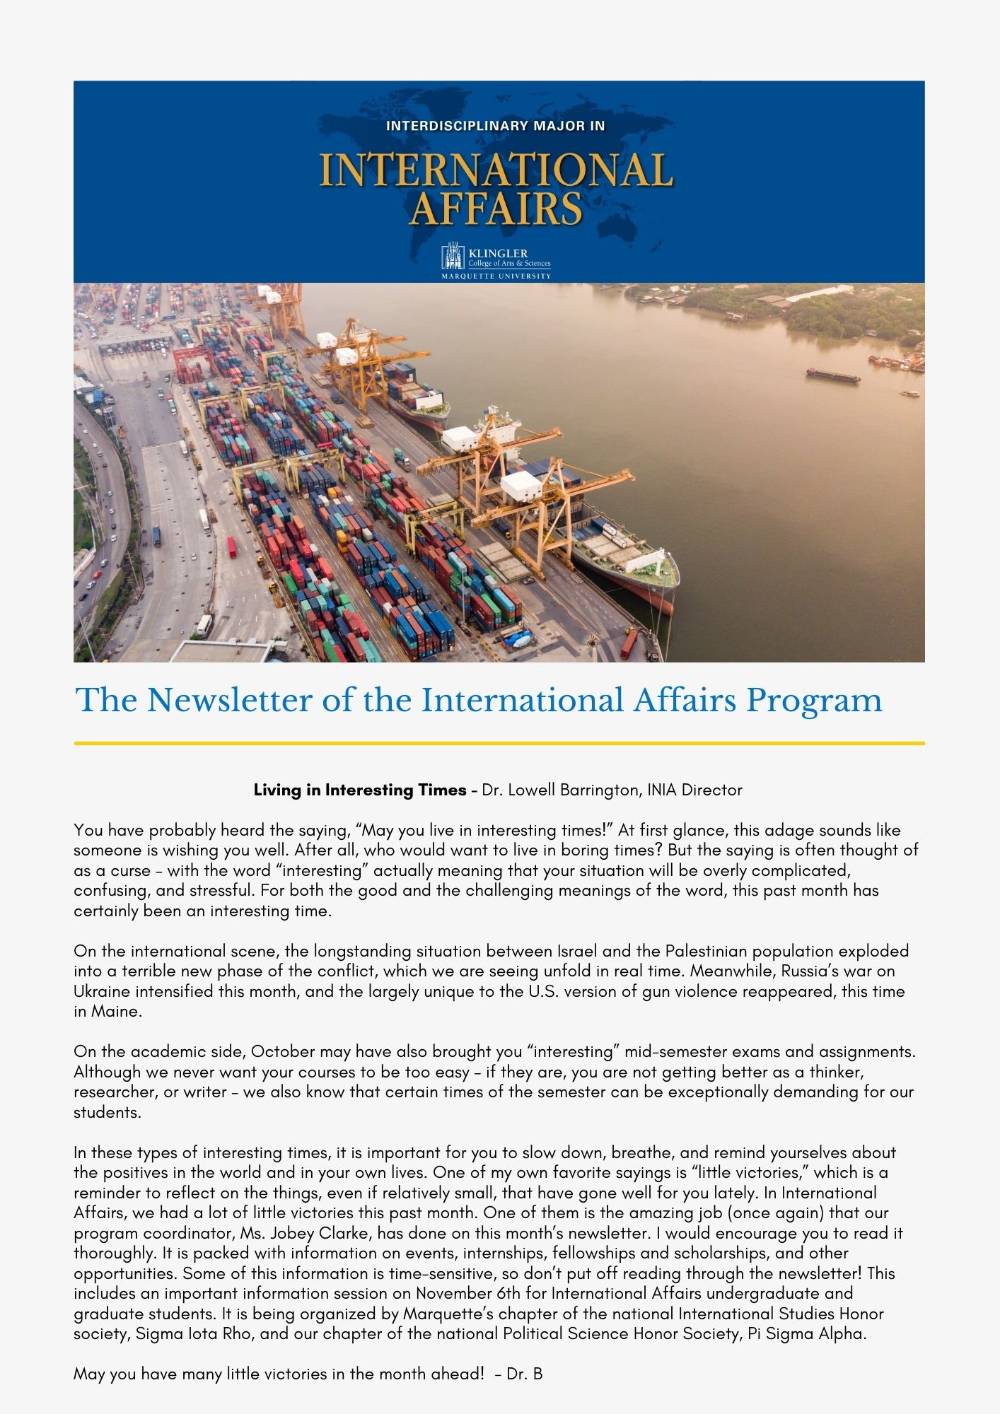 Cover of the INIA Newsletter for the October 2023 edition.